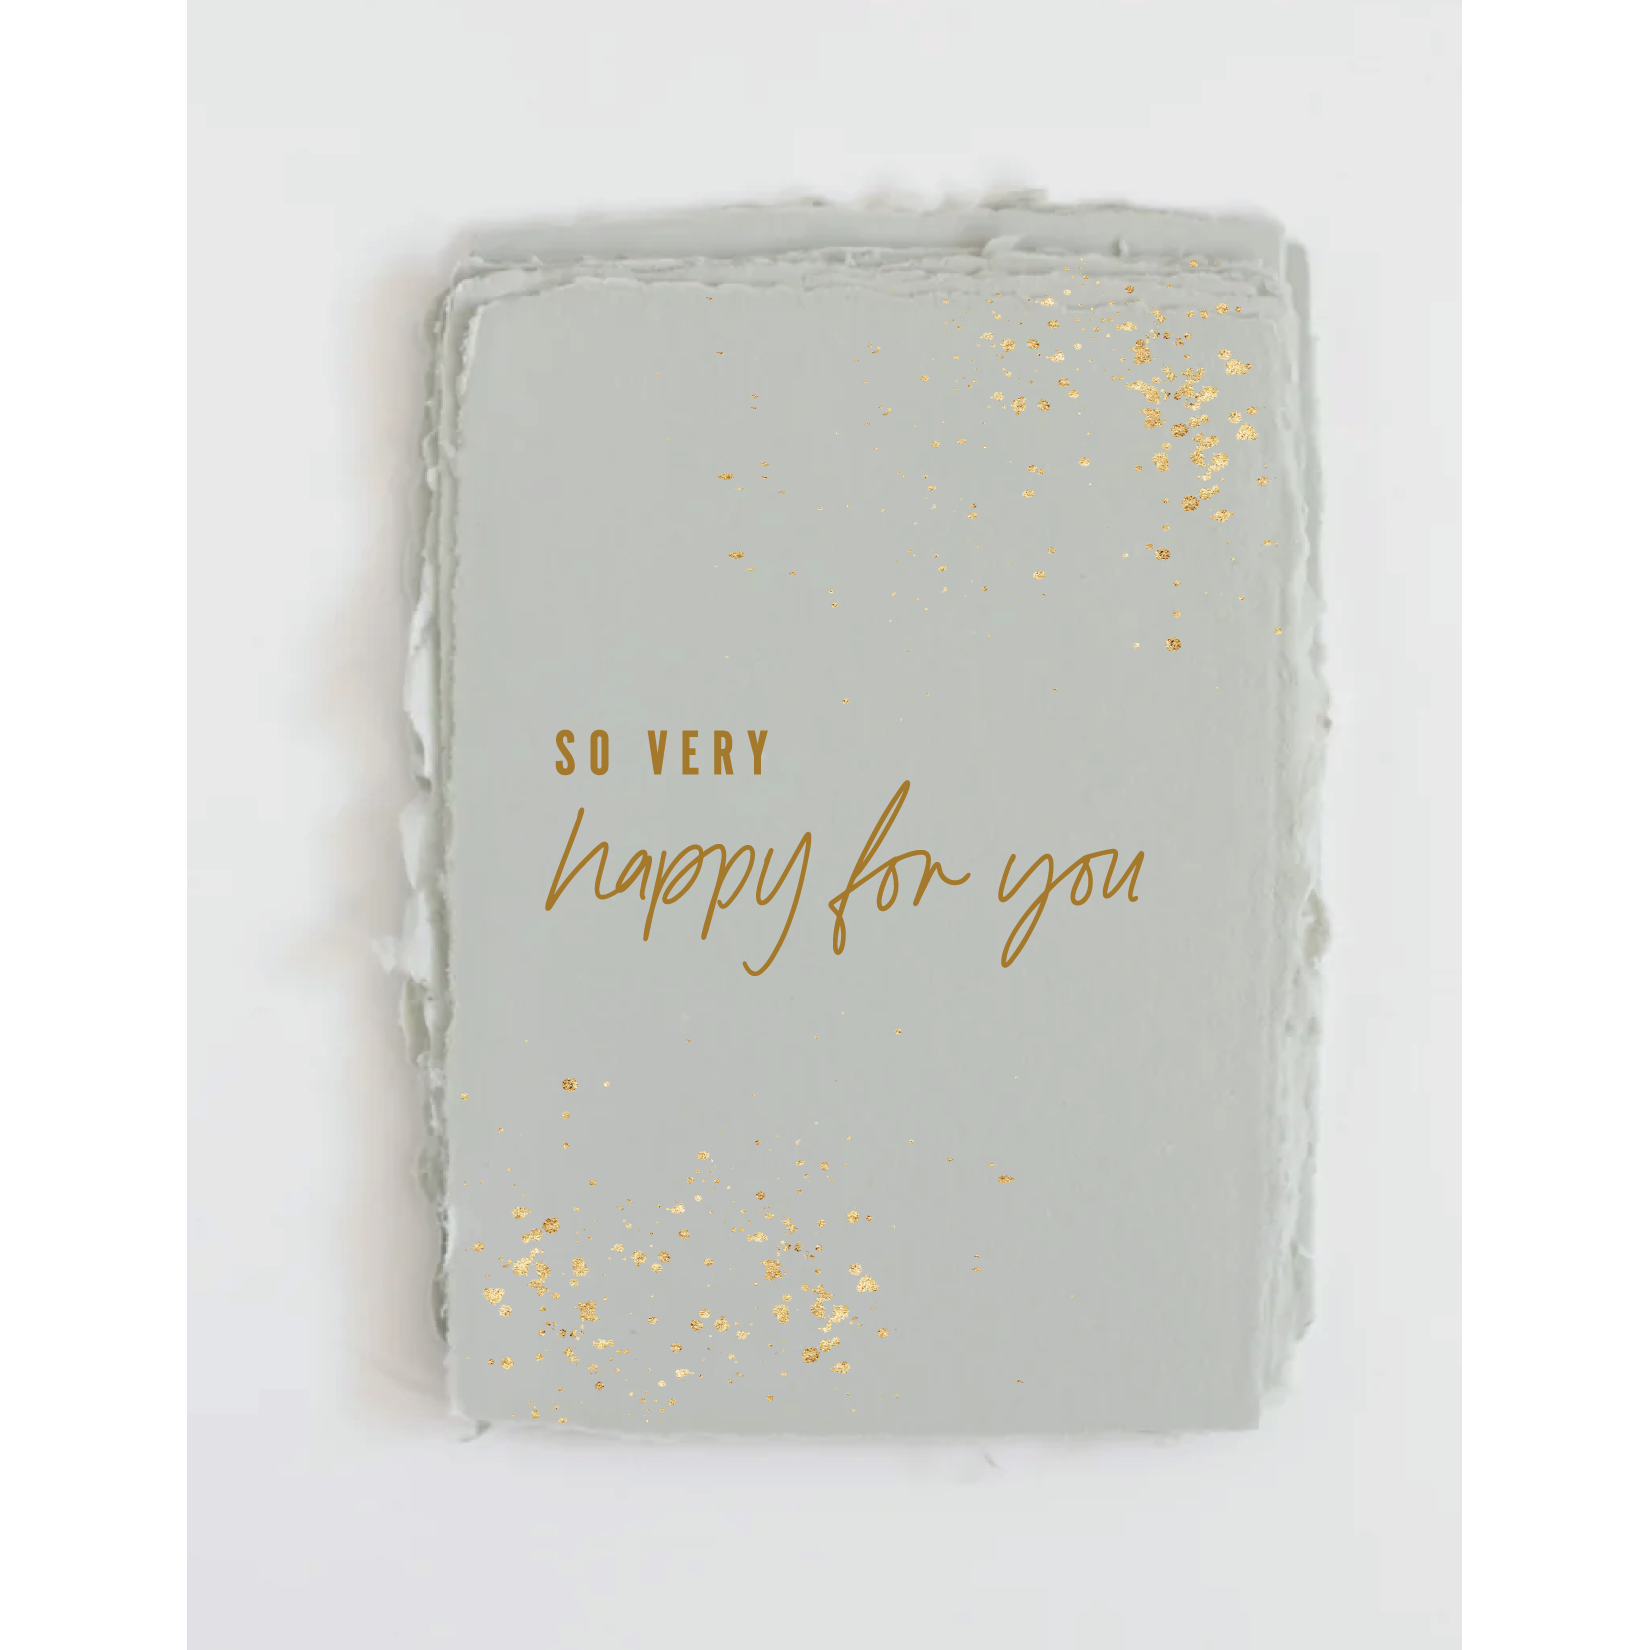 "So very happy for you" Foil Greeting Card